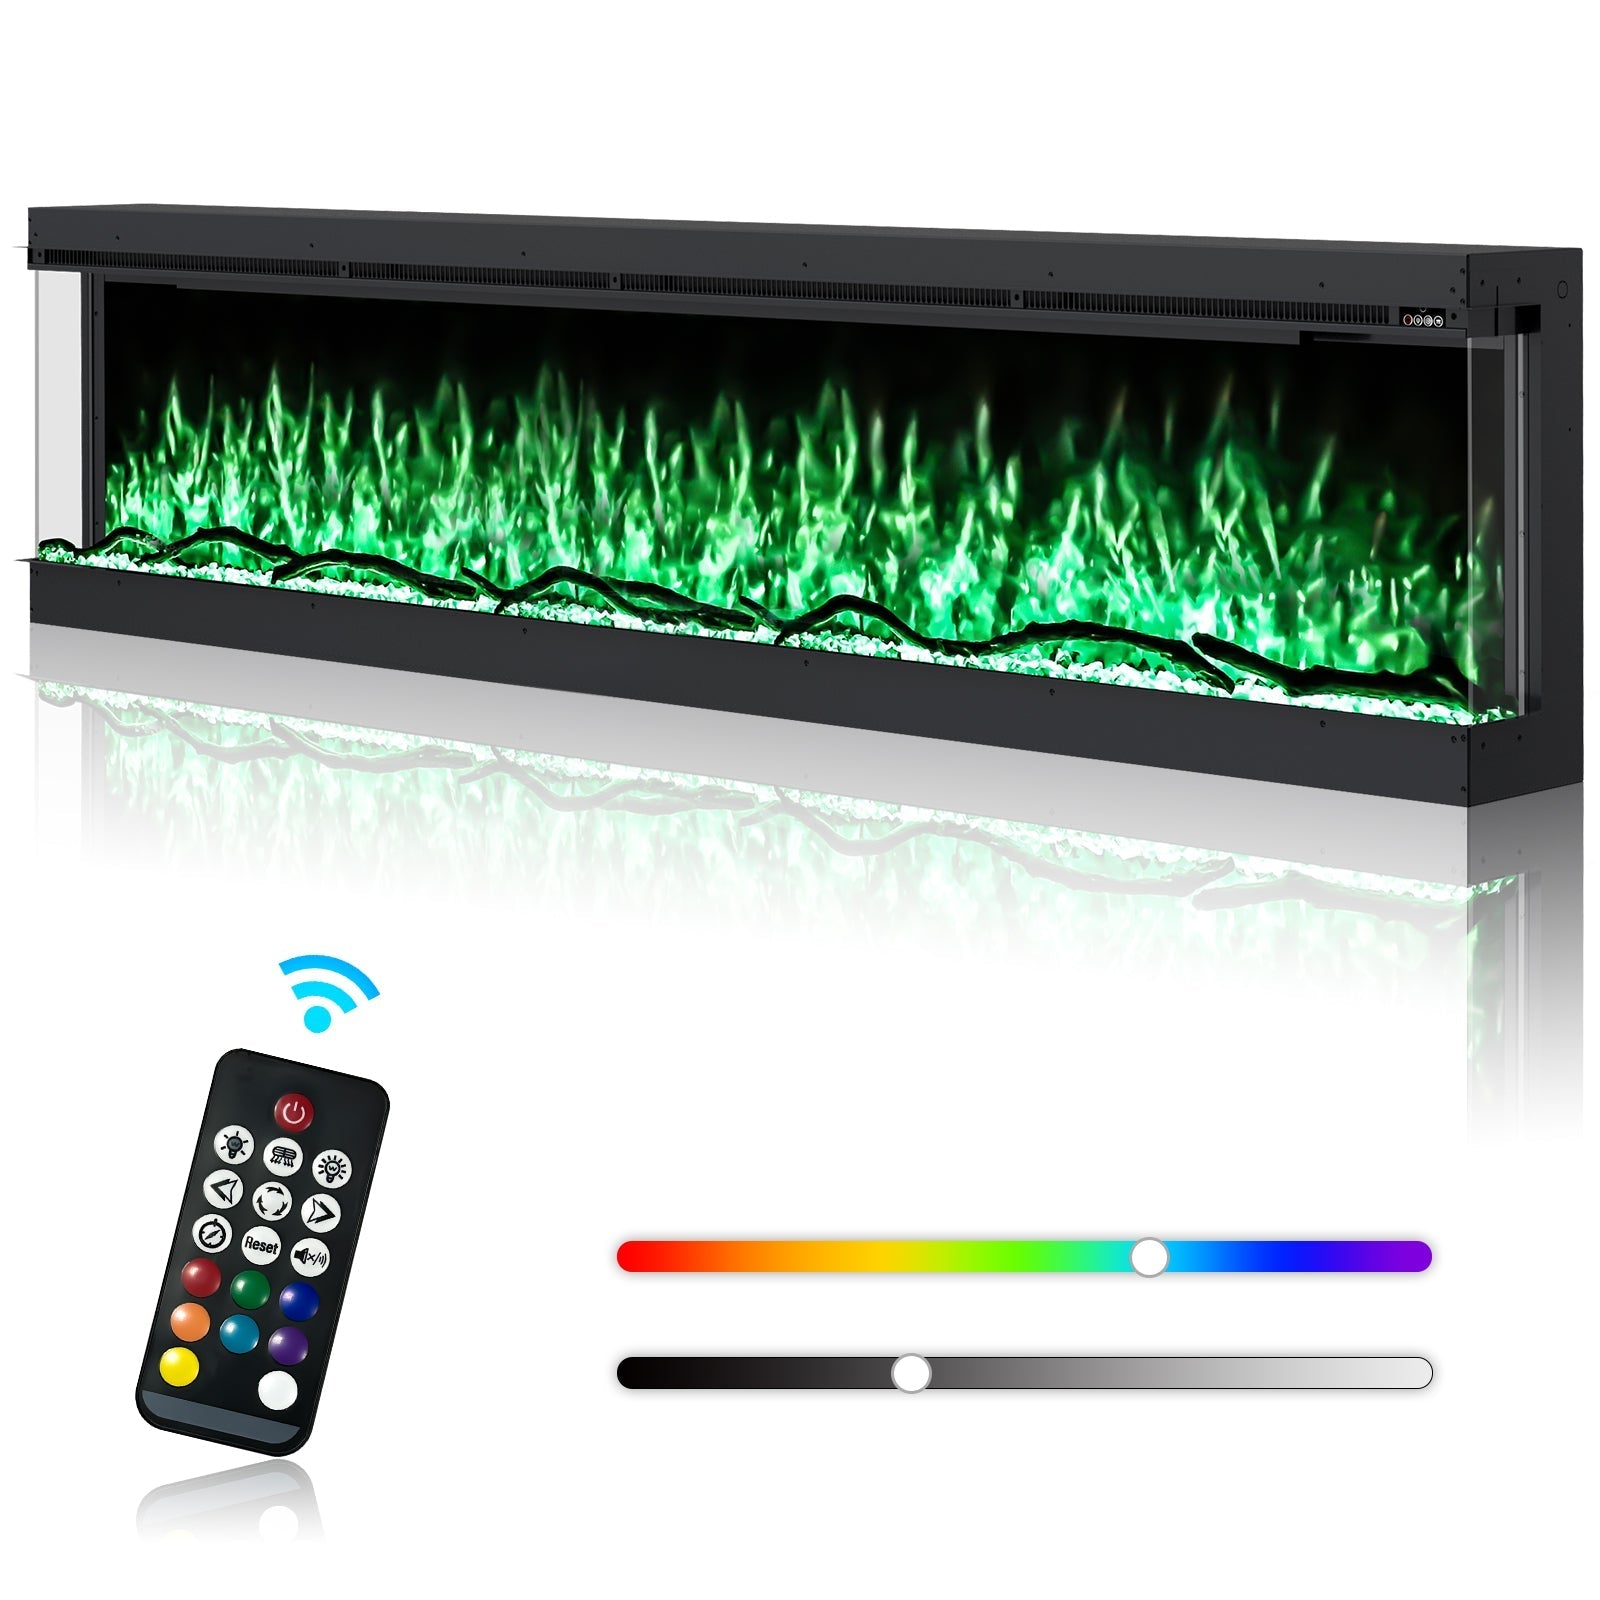 Inserts 3-Sided Electric Fireplace 70-inch Long Modern Eletric Fire Place Space Heater for Indoor Living Room Bedroom Use, Realistic Led Flame Color with Remote Control, Log & Crystals, Black